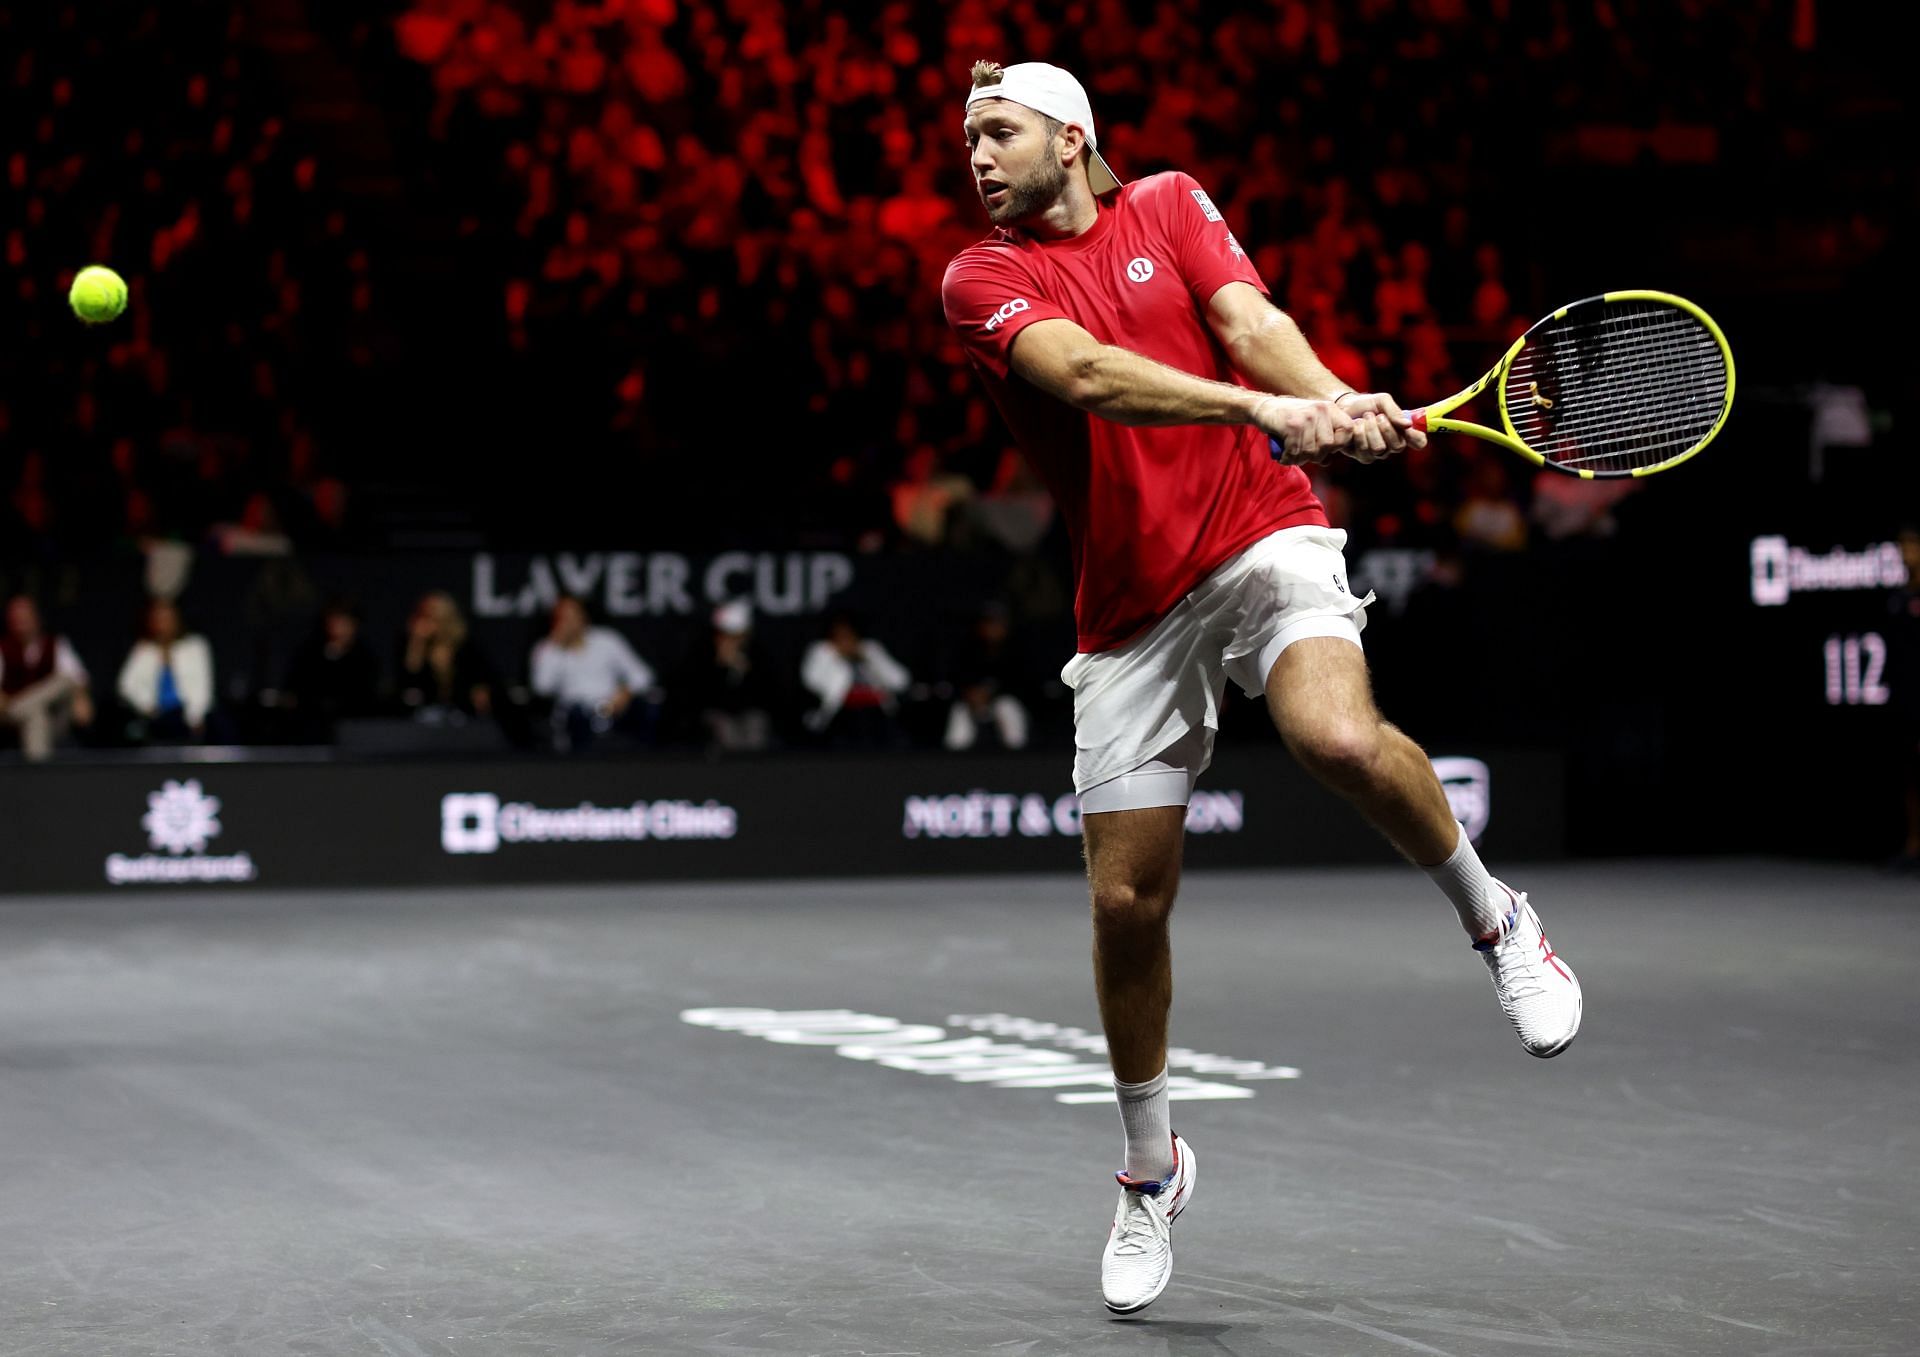 Jack Sock in action during the 2022 Laver Cup